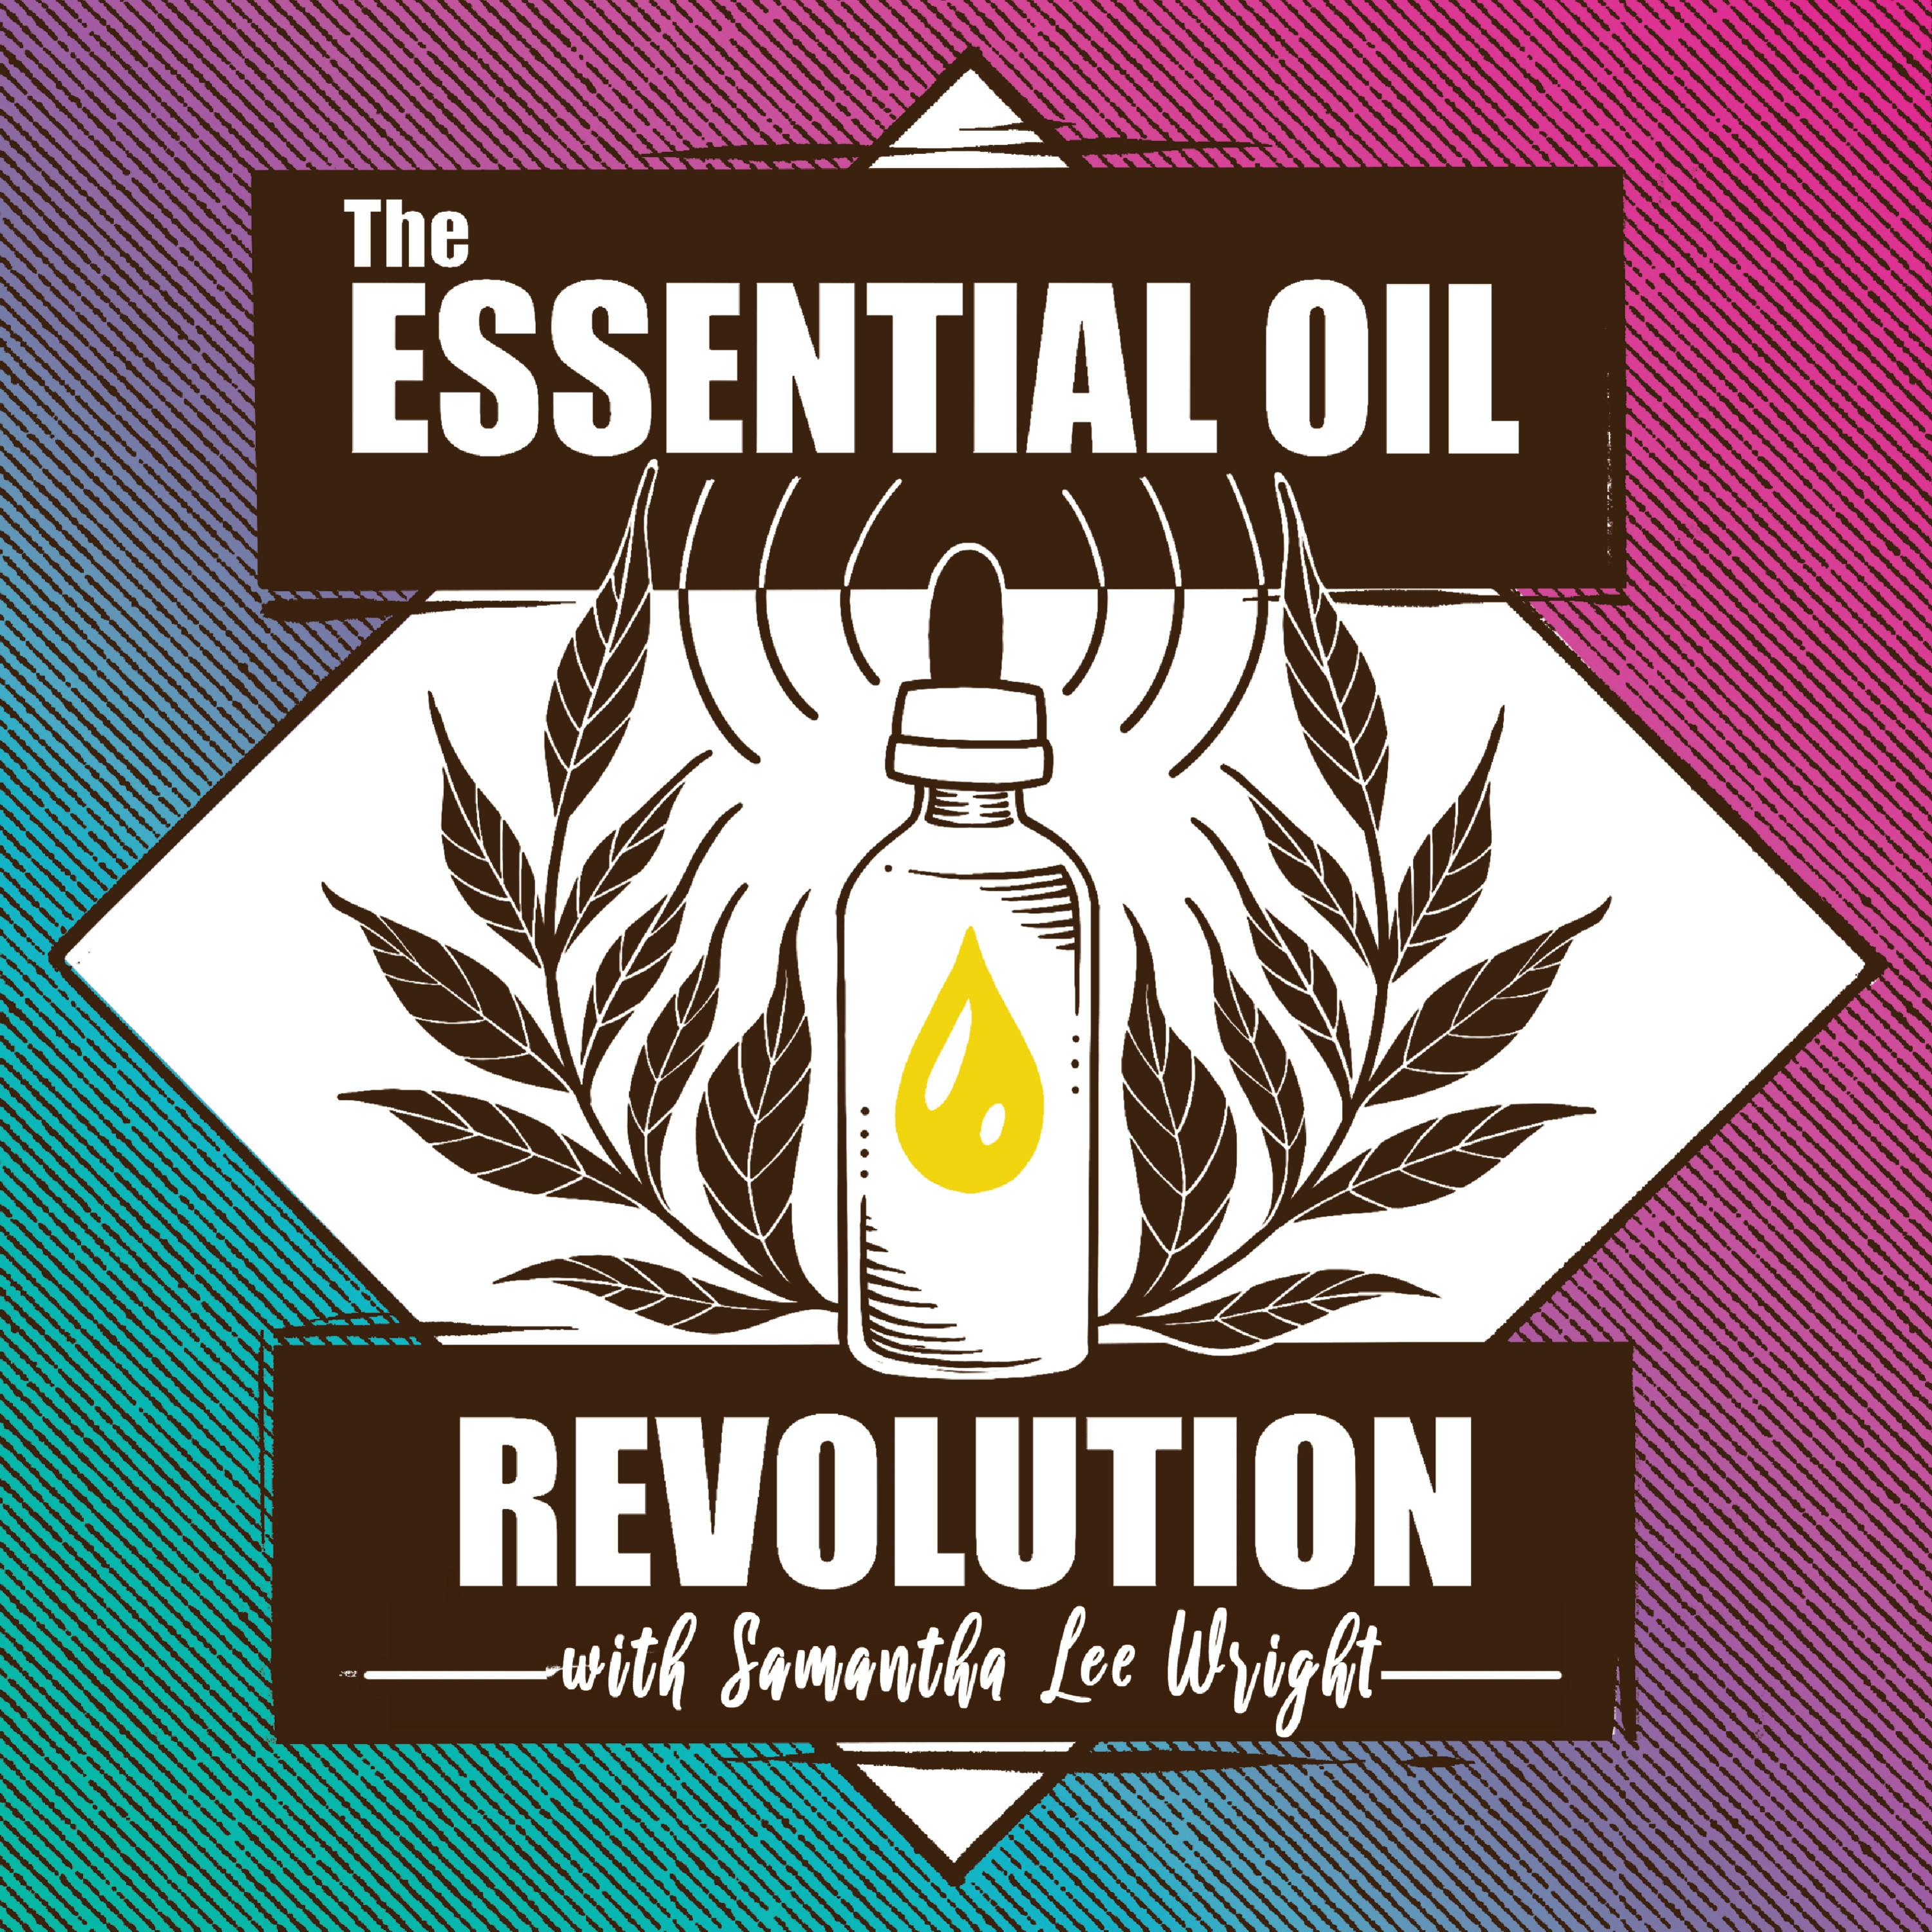 303: Witchcraft, Magik, and Essential Oils w/ Crystal Moon